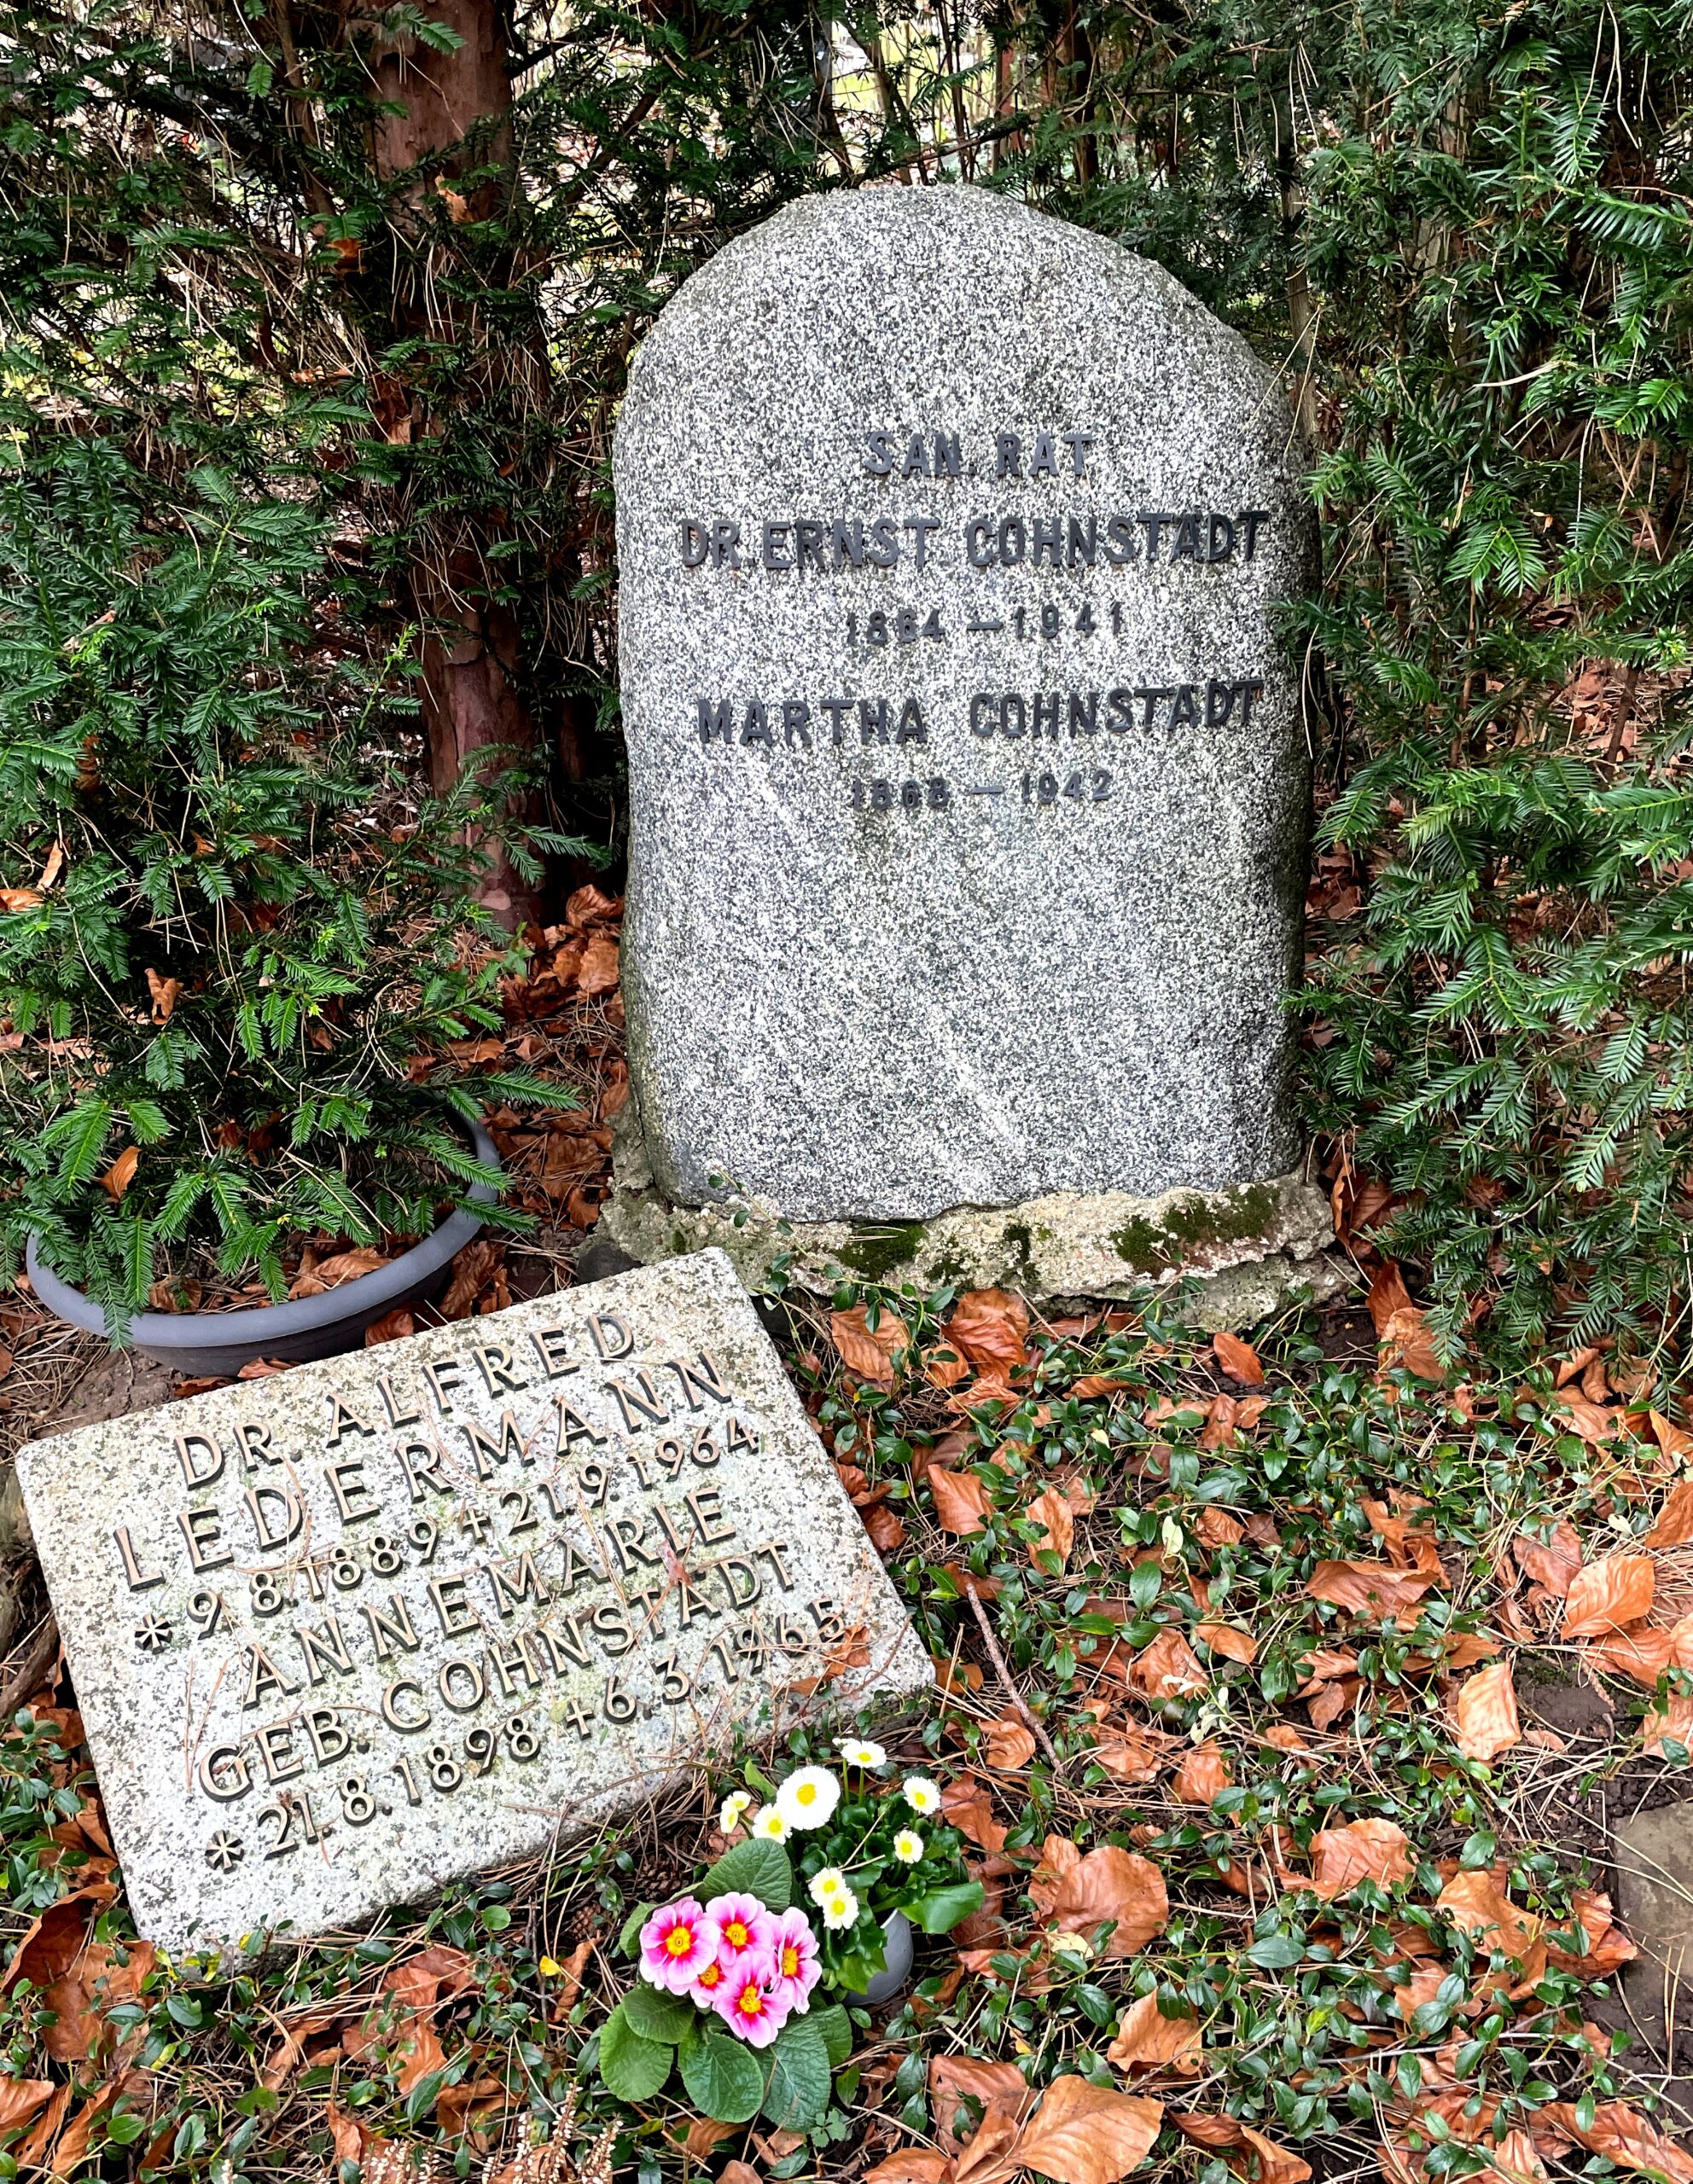 Gravesite of the married couples Cohnstädt and Ledermann, South Cemetery Cologne, photo by Sabine Kampmann 2023 